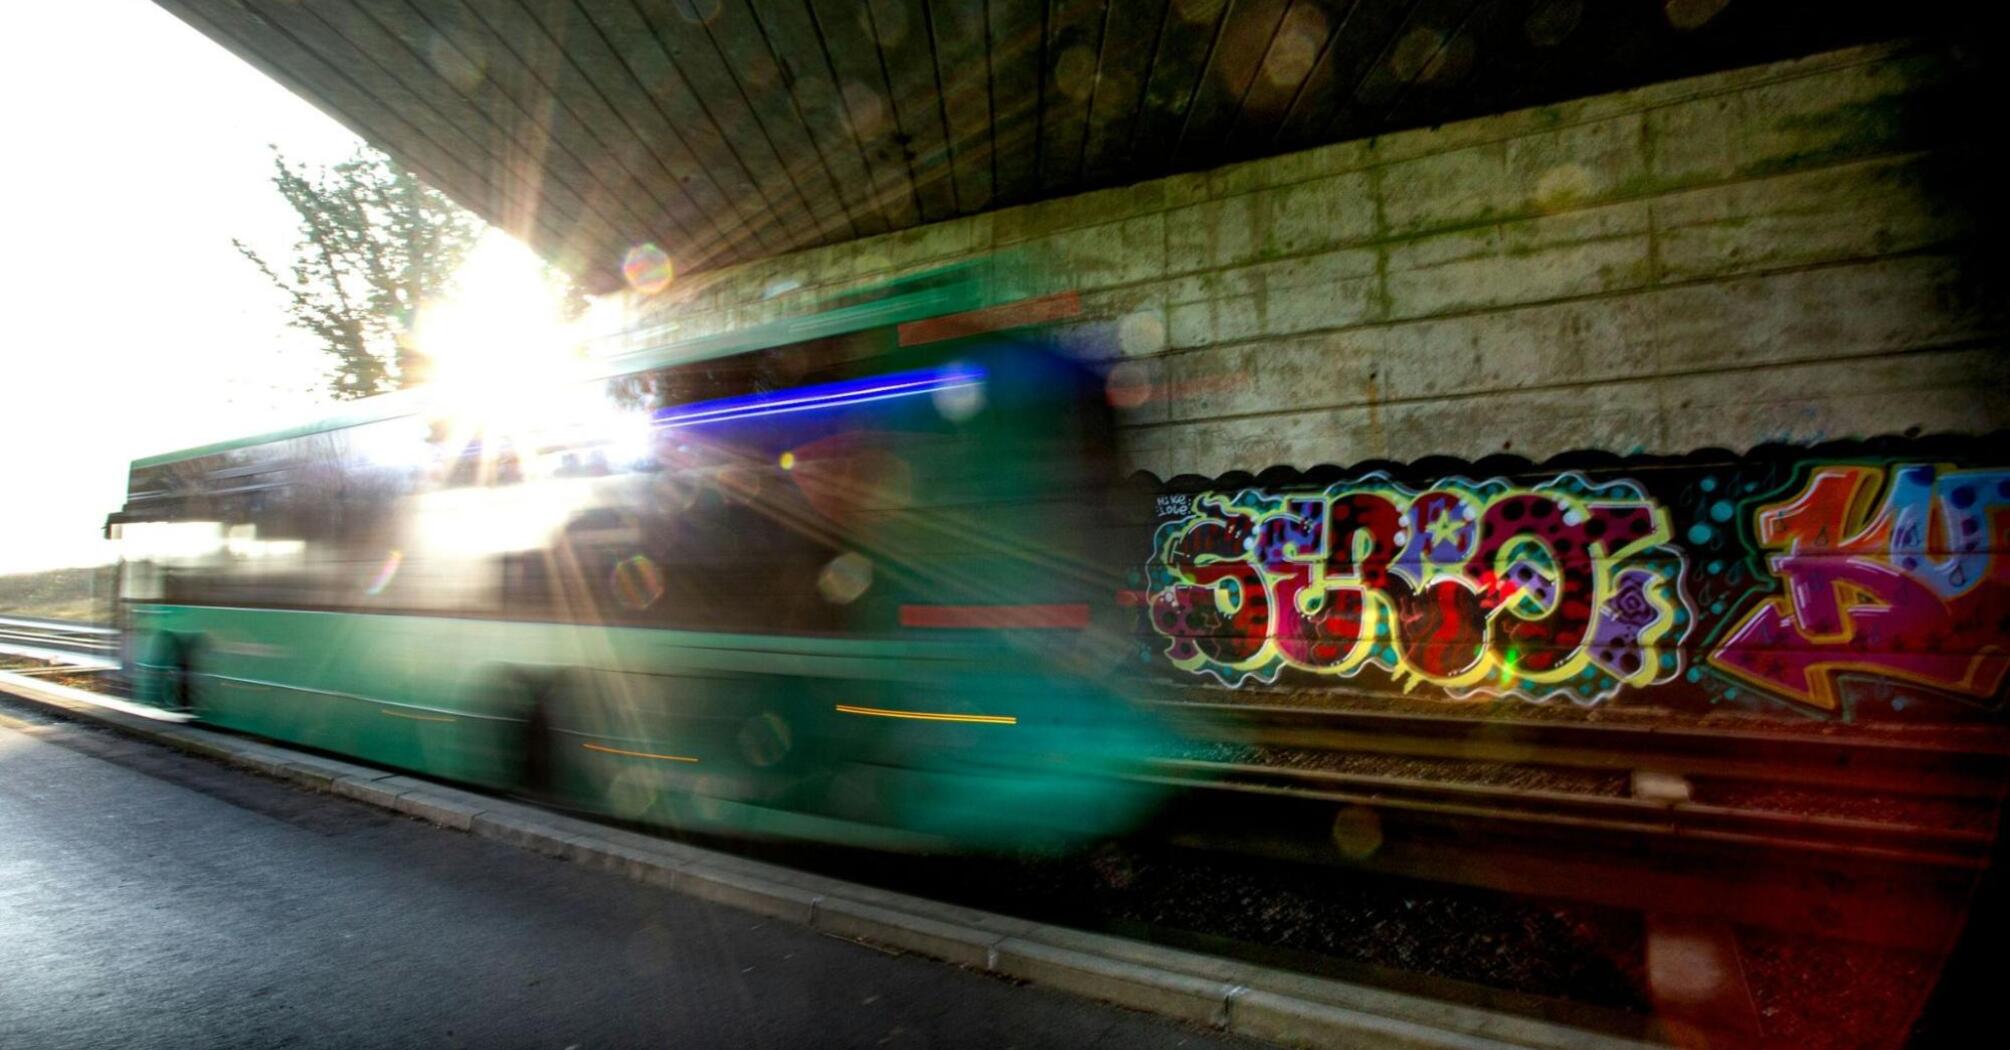 A green Stagecoach bus travels quickly under a bridge with graffiti art on the wall, sunlight flaring in the background